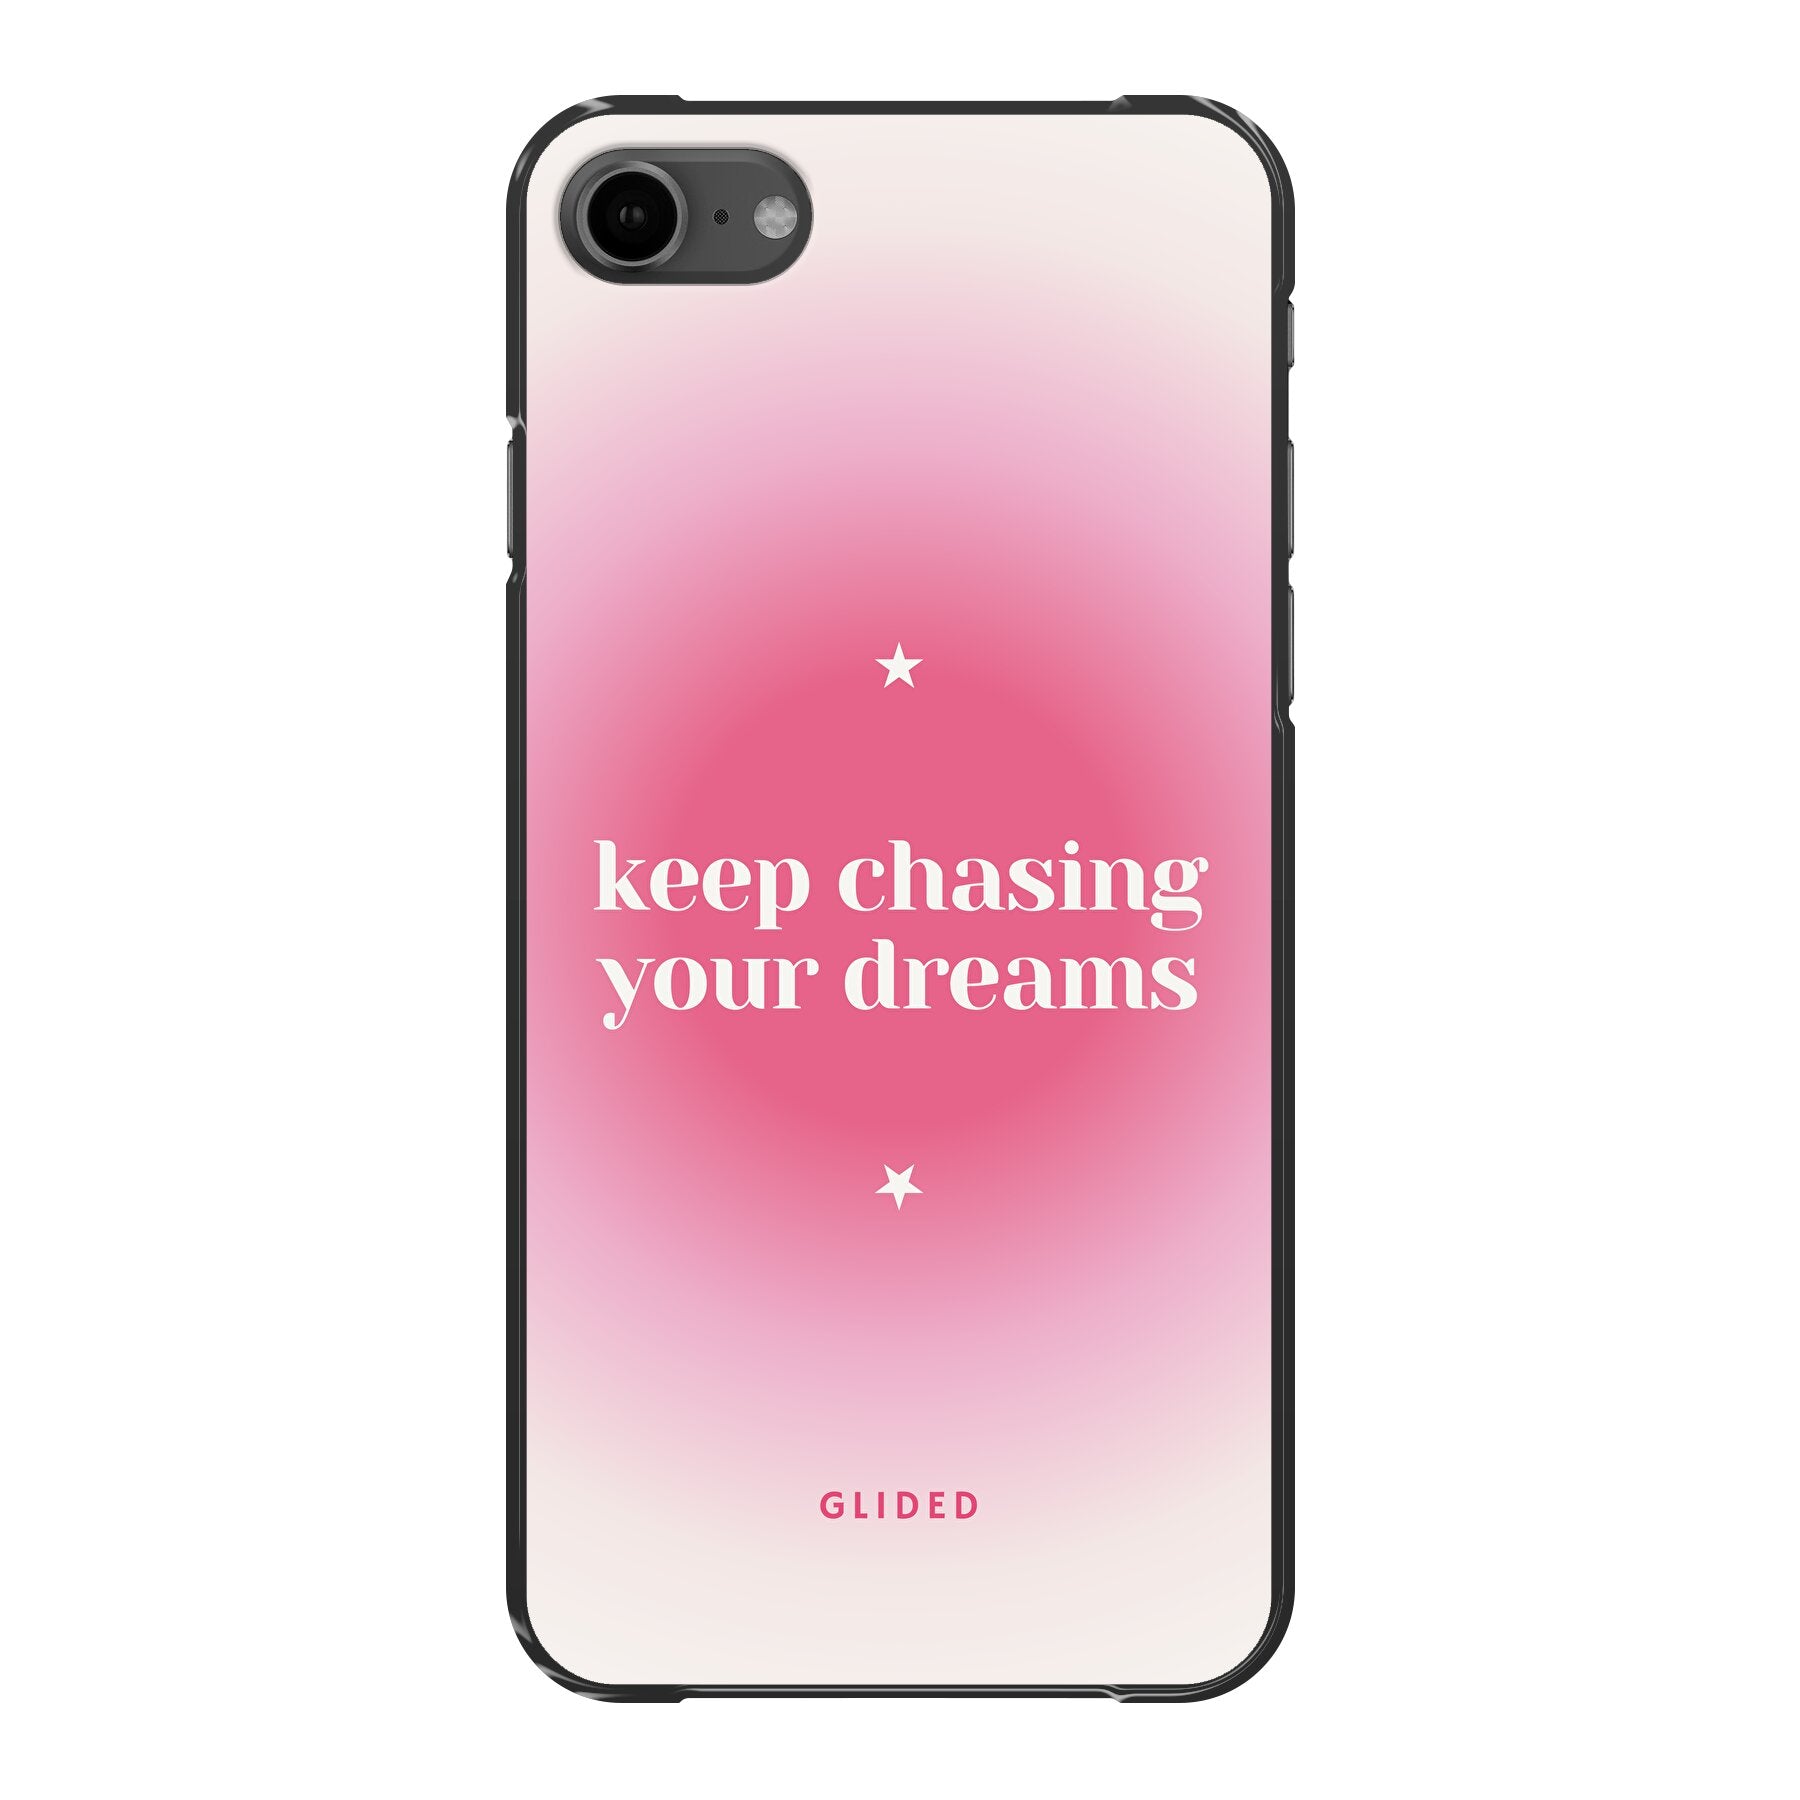 Chasing Dreams - iPhone 7 Handyhülle Hard Case